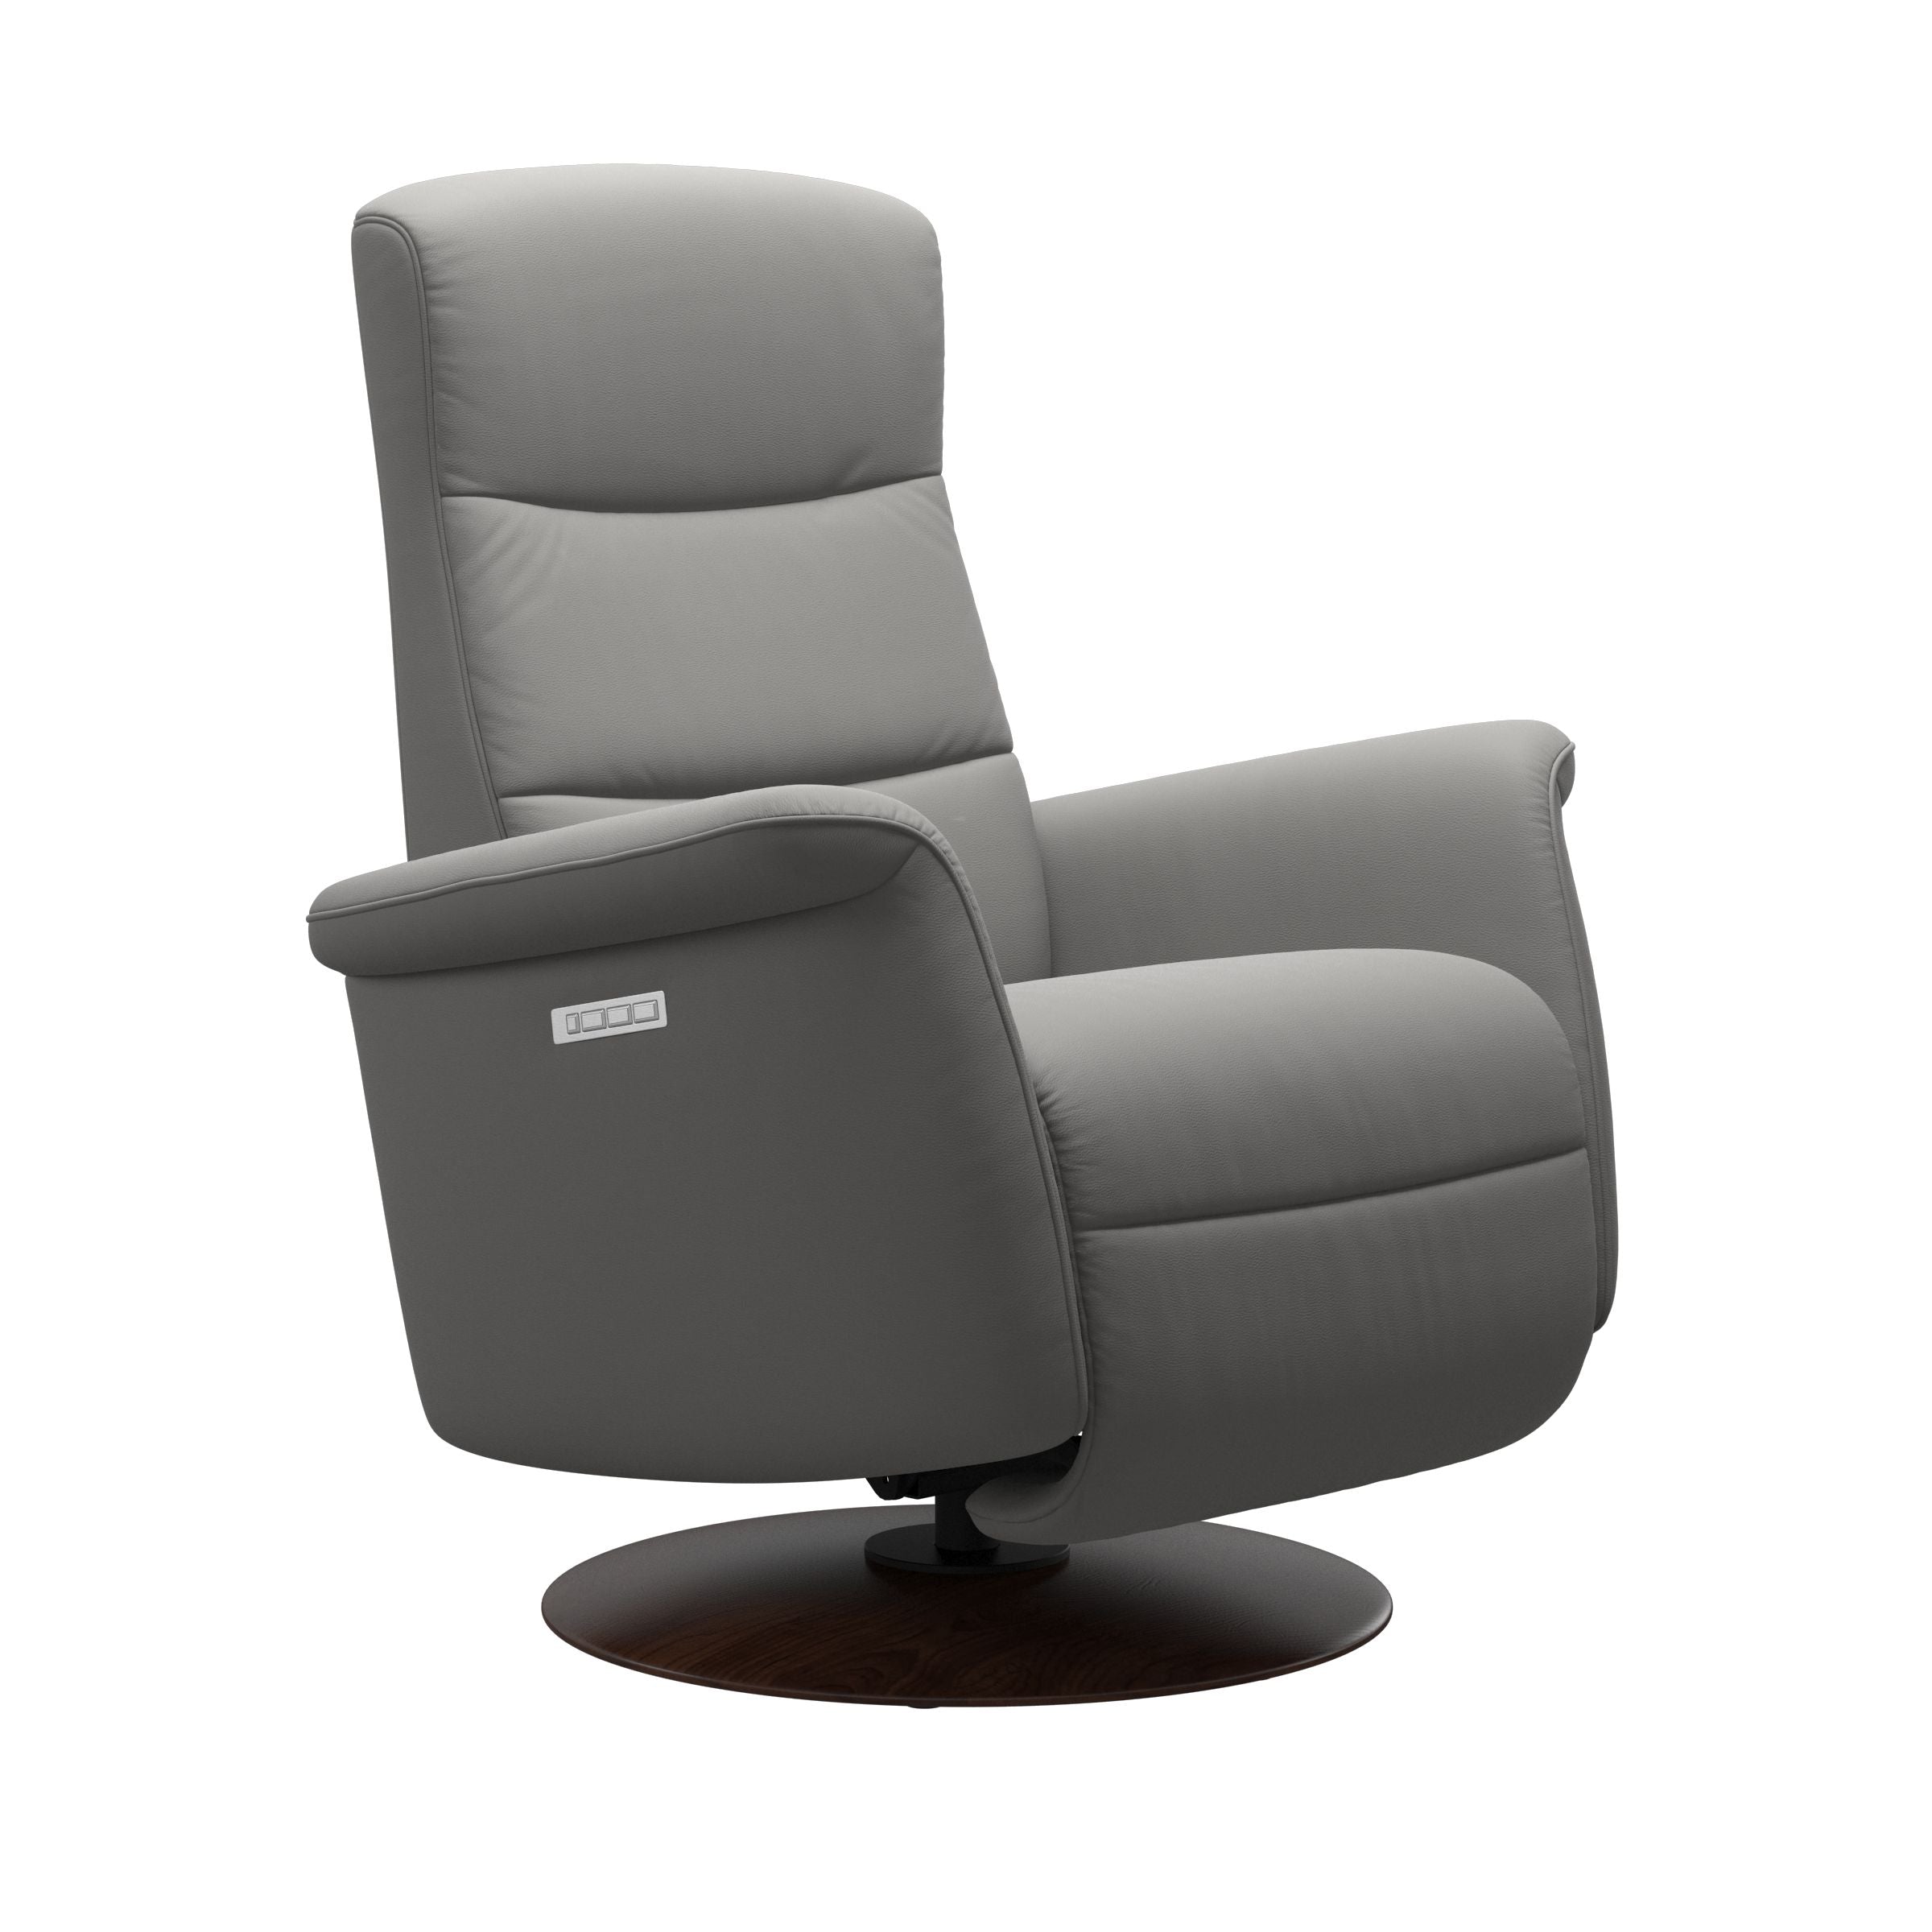 Stressless Mike Small Recliner with Wood Moon Base